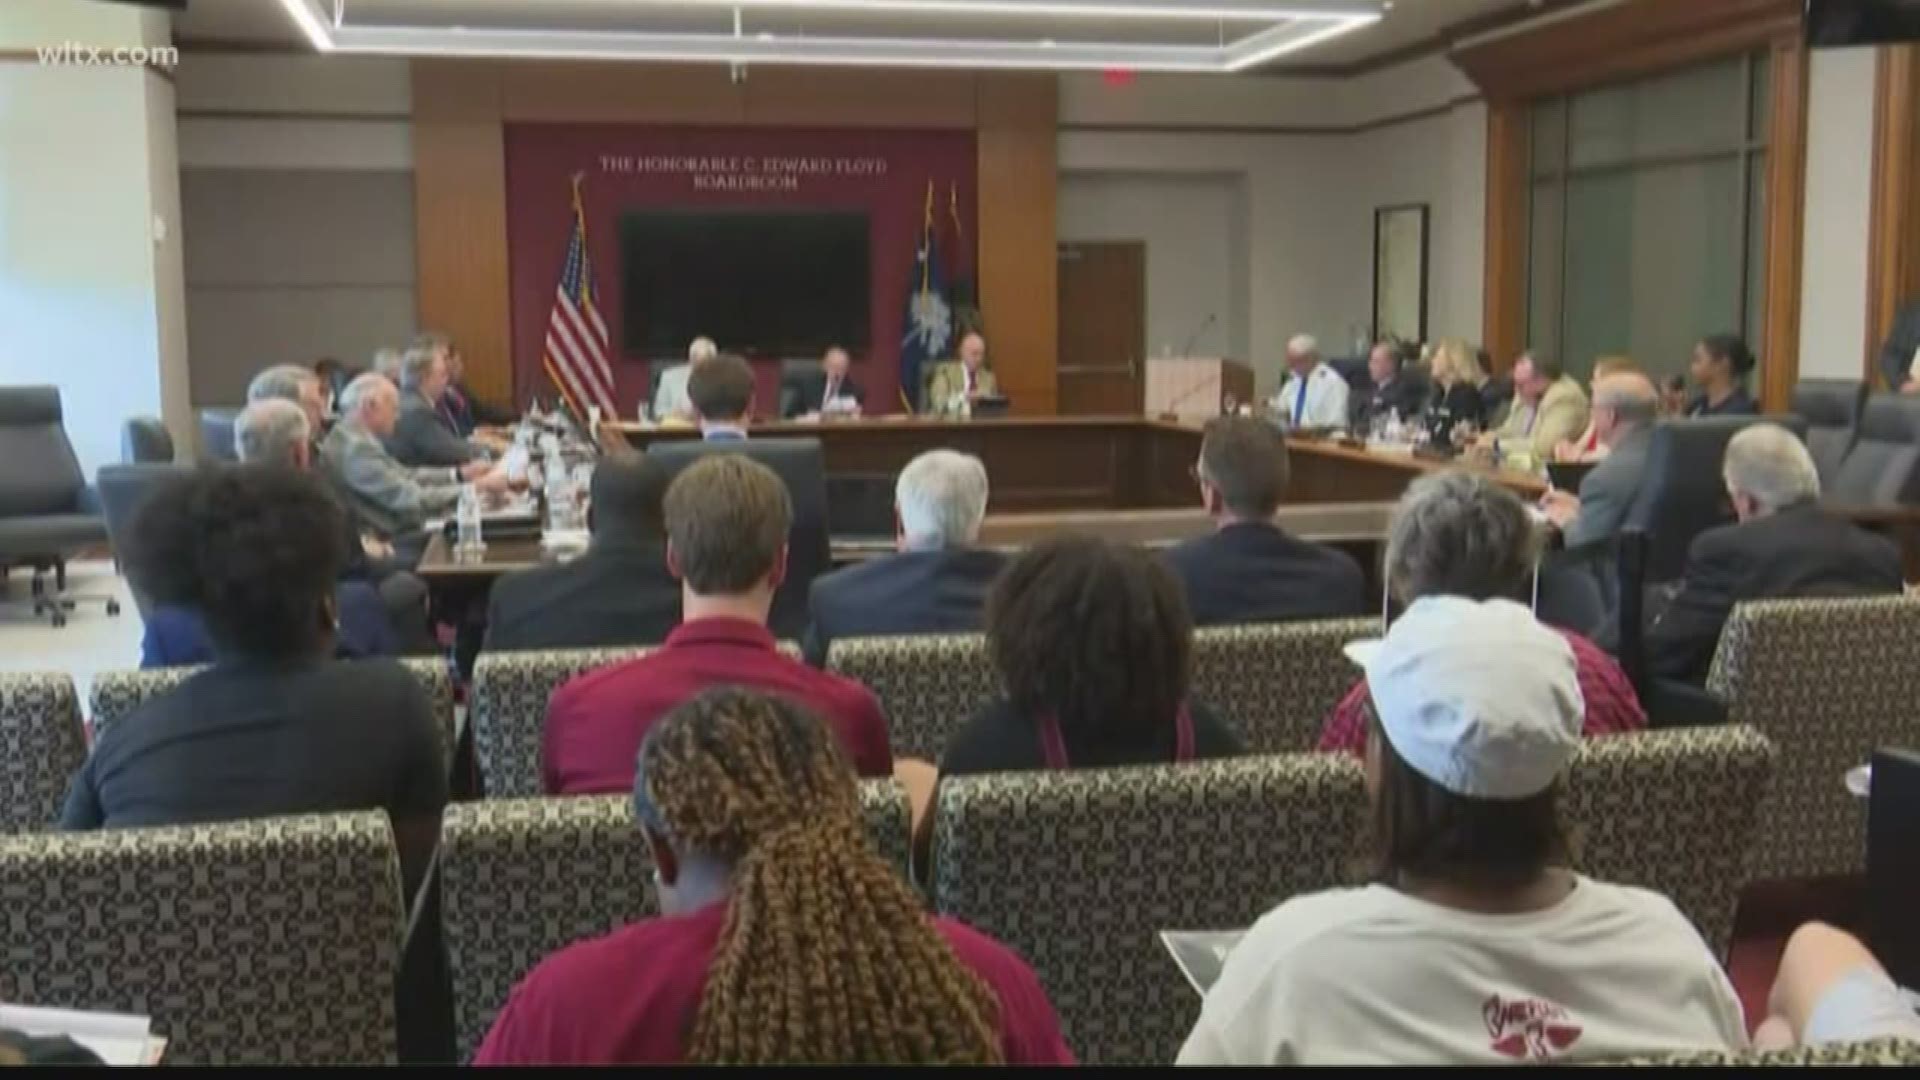 A bill to remove all the elected University of South Carolina trustees from the board and reduce the number of seats has spawned a diversity debate.